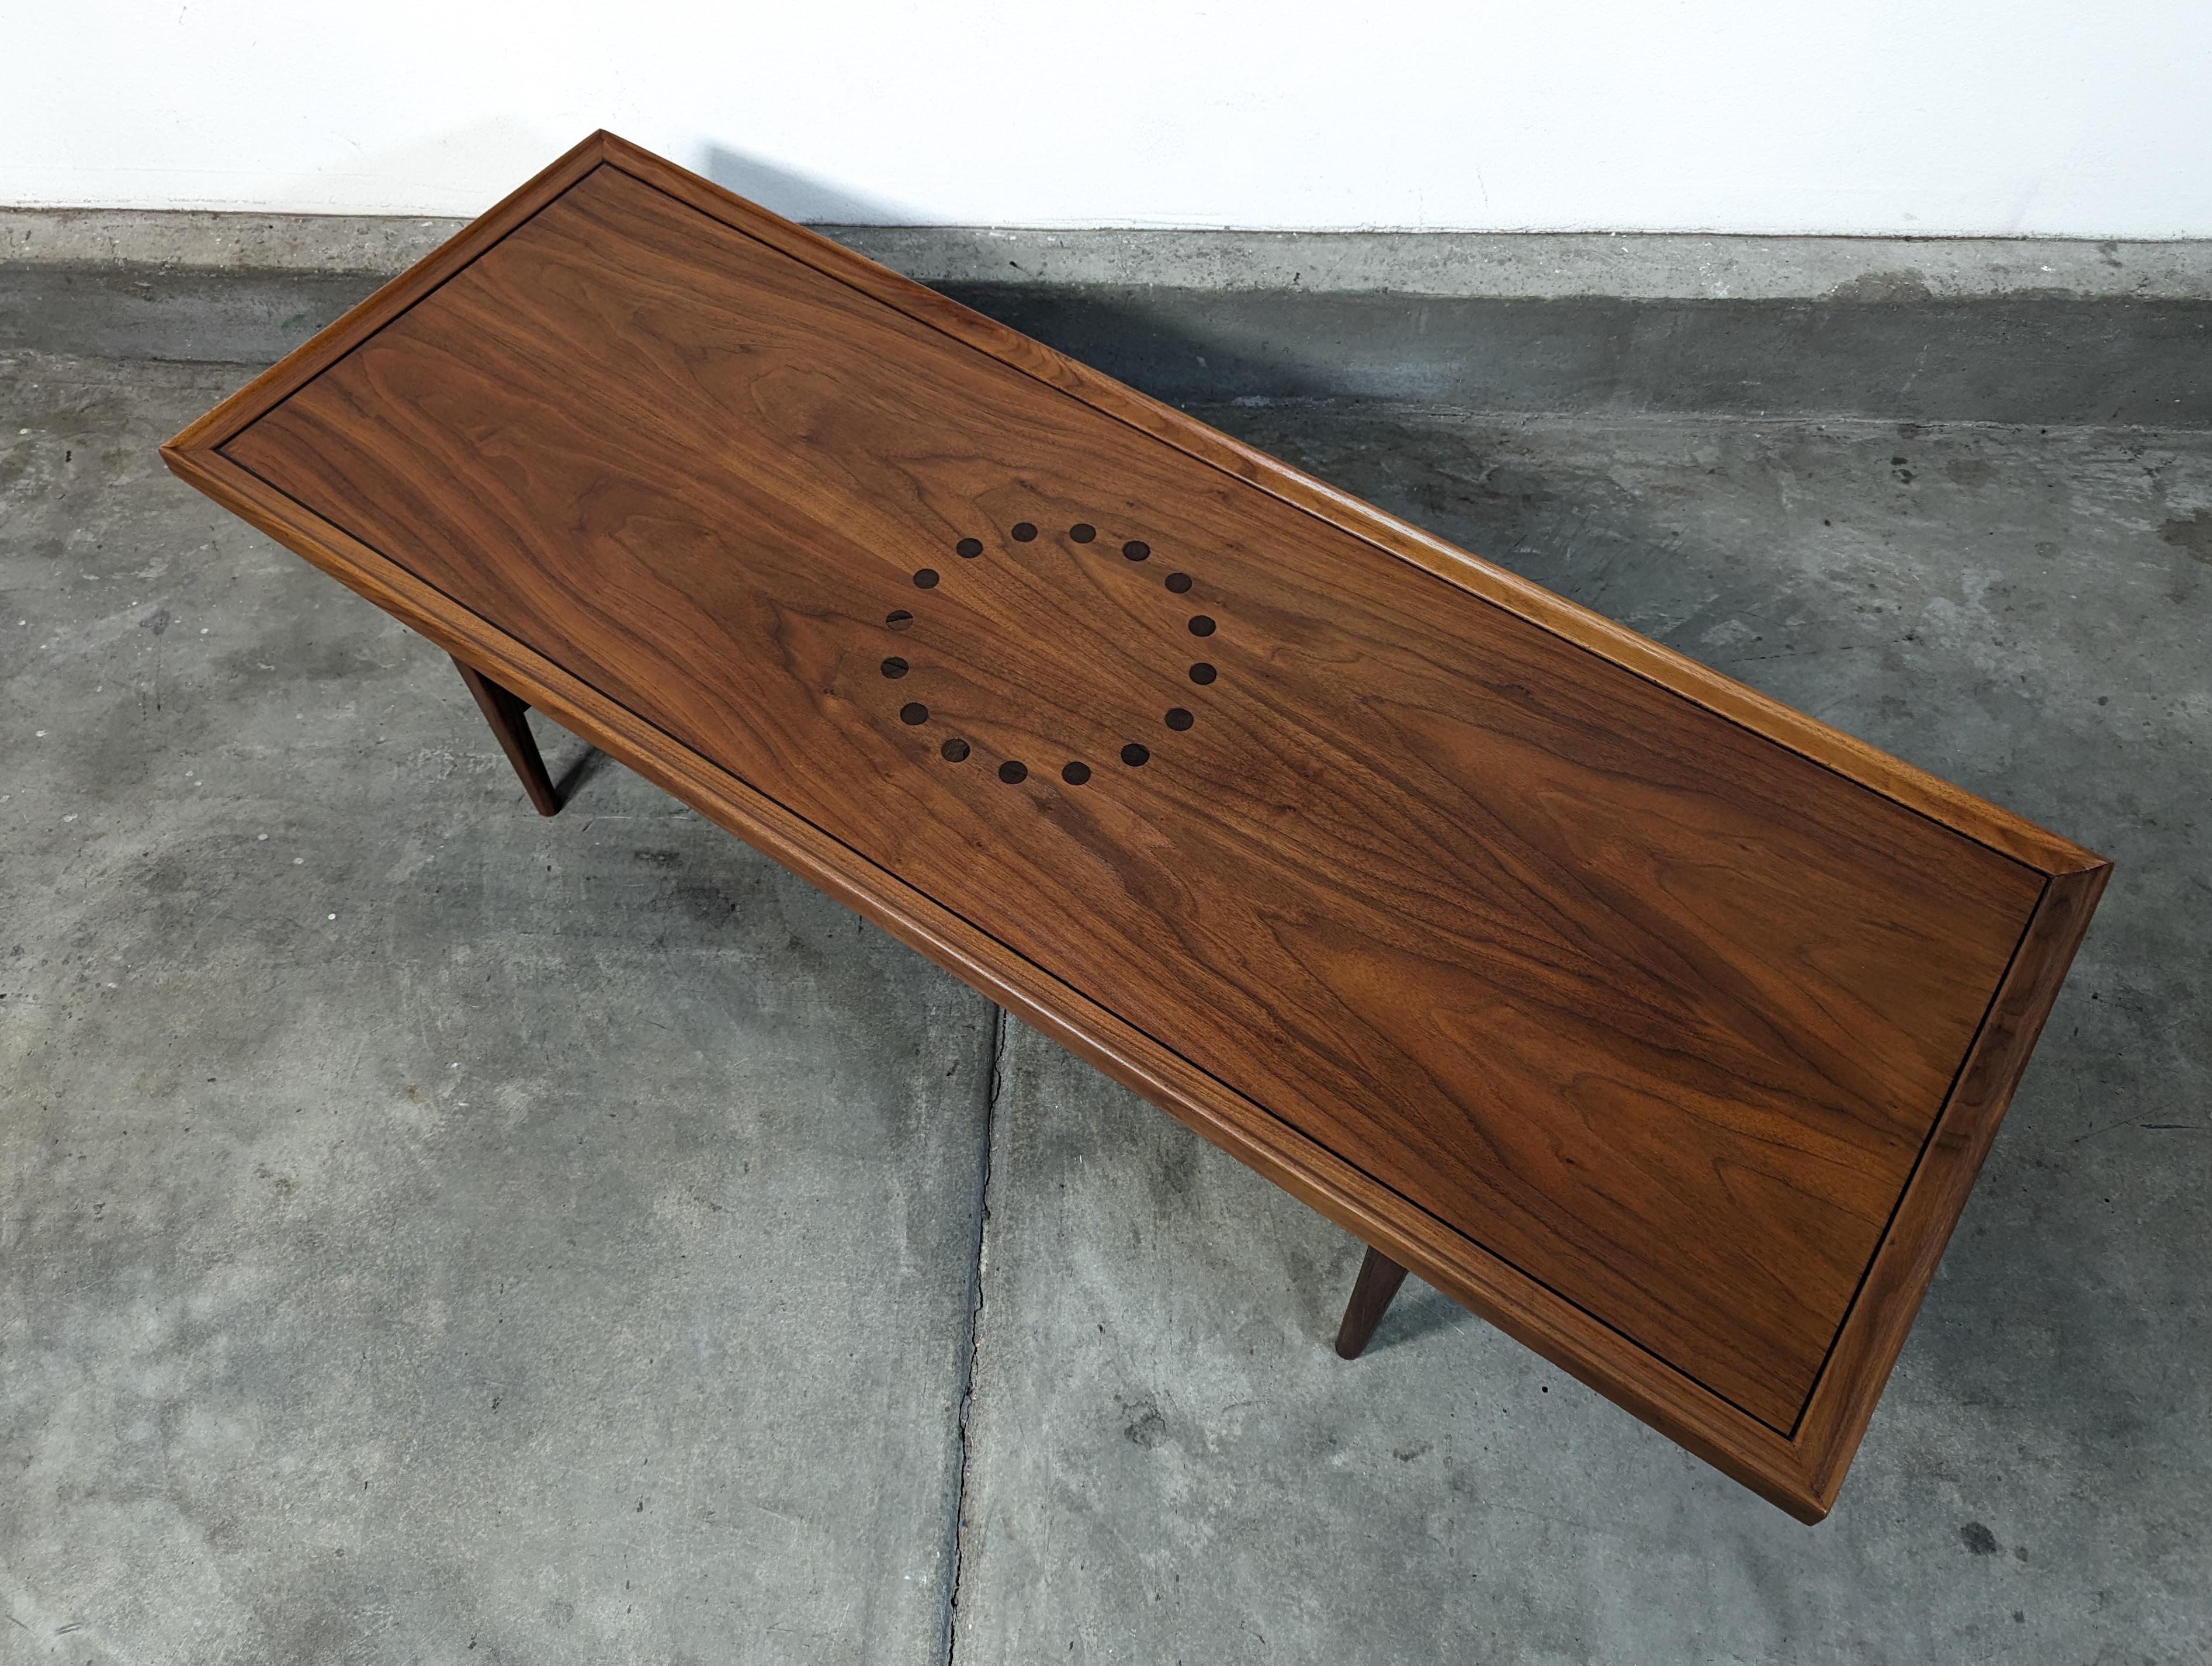 Mid Century Modern Coffee Table By Drexel, Declaration Line, c1960s For Sale 5